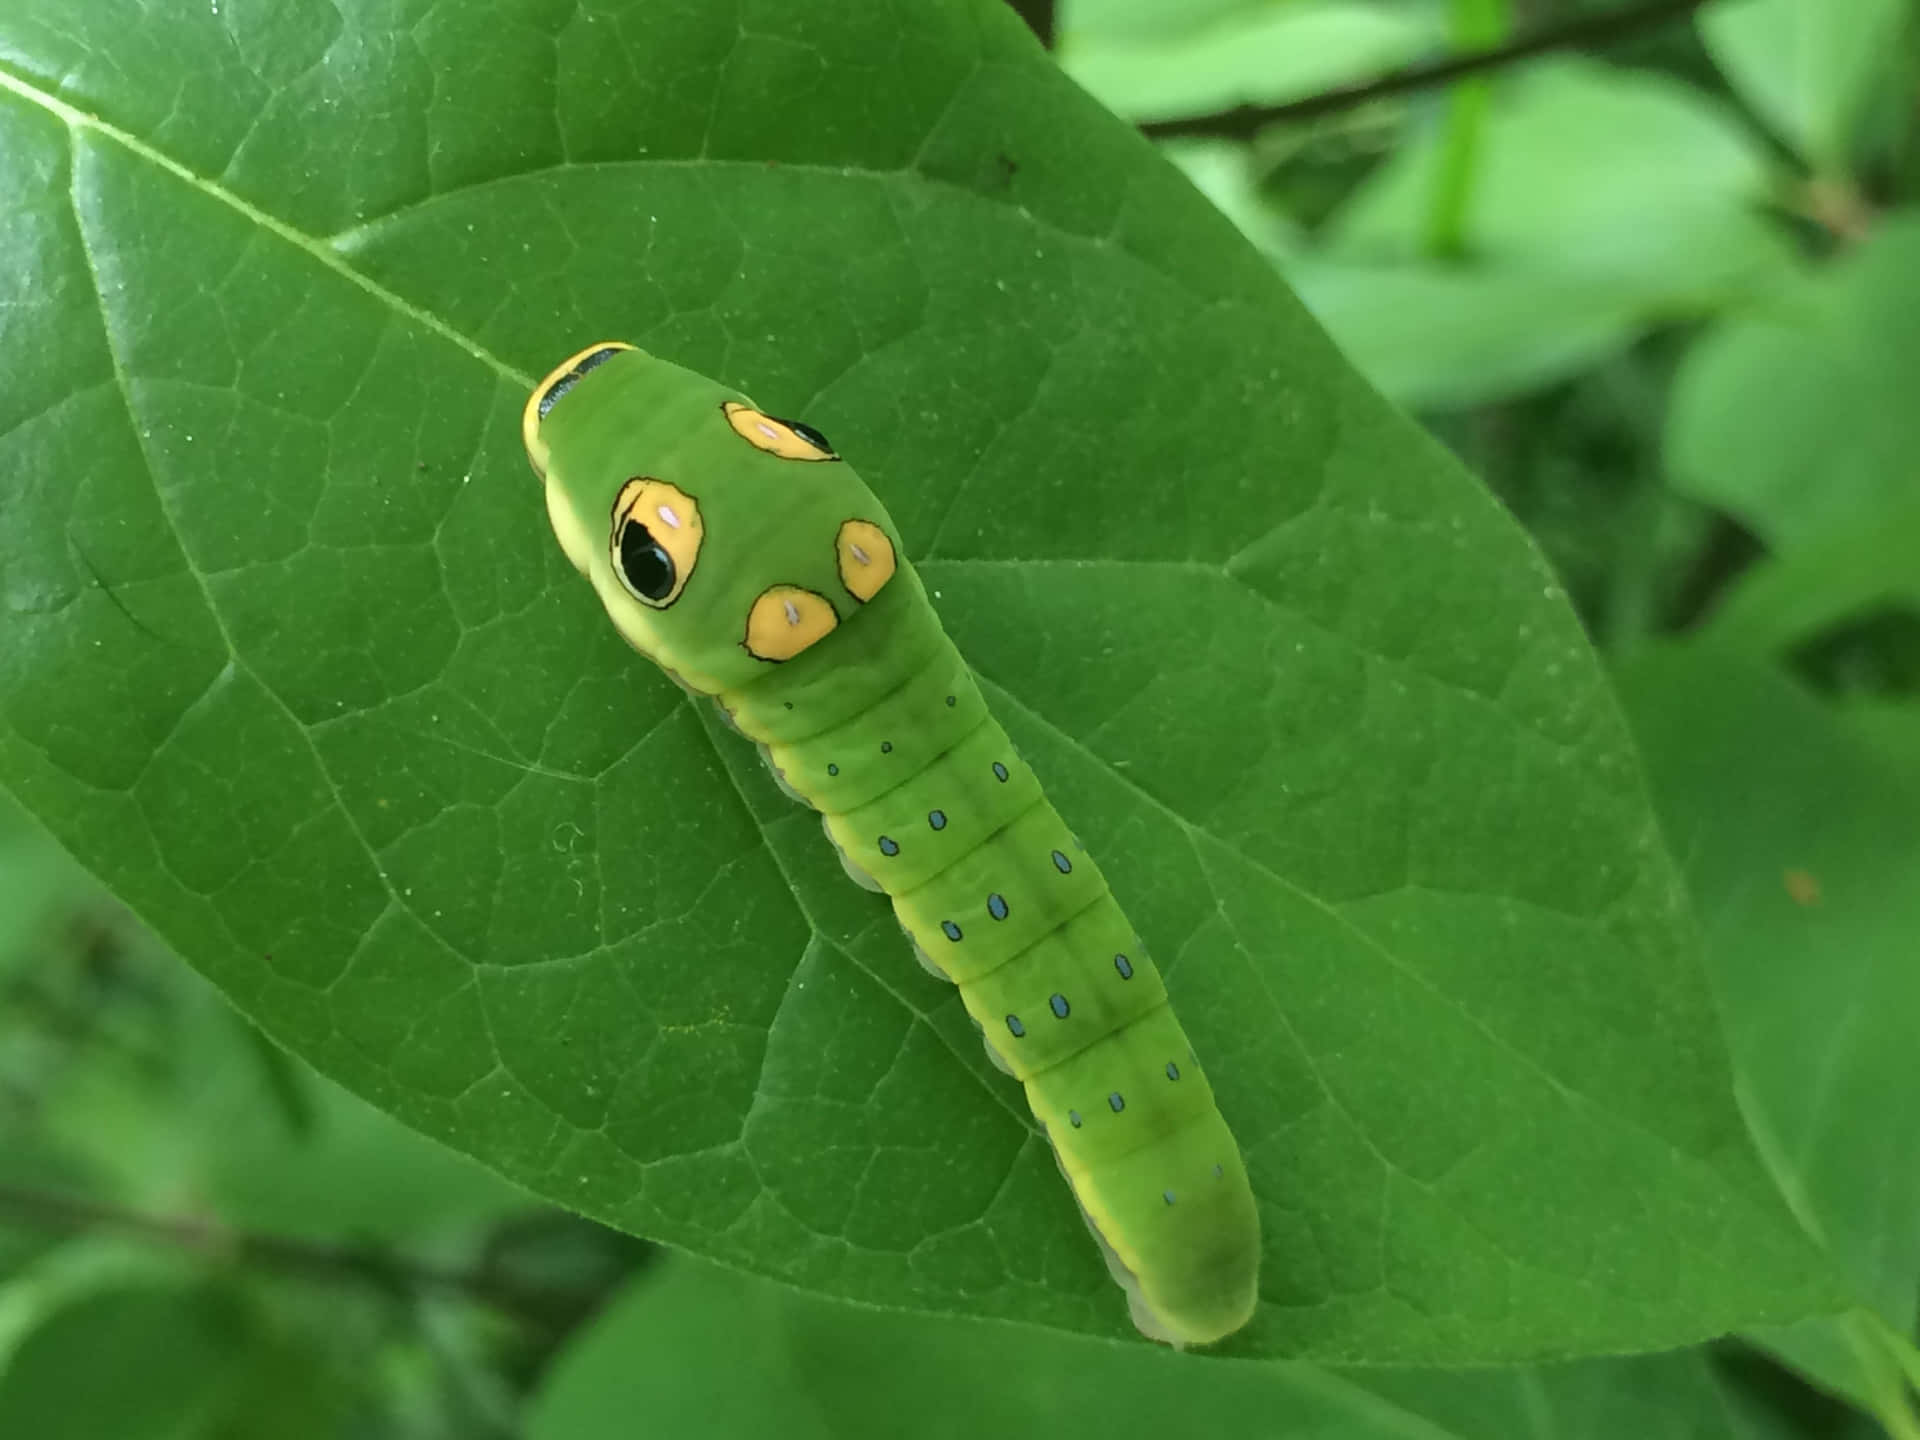 A Green Caterpillar On A Leaf With Yellow Eyes